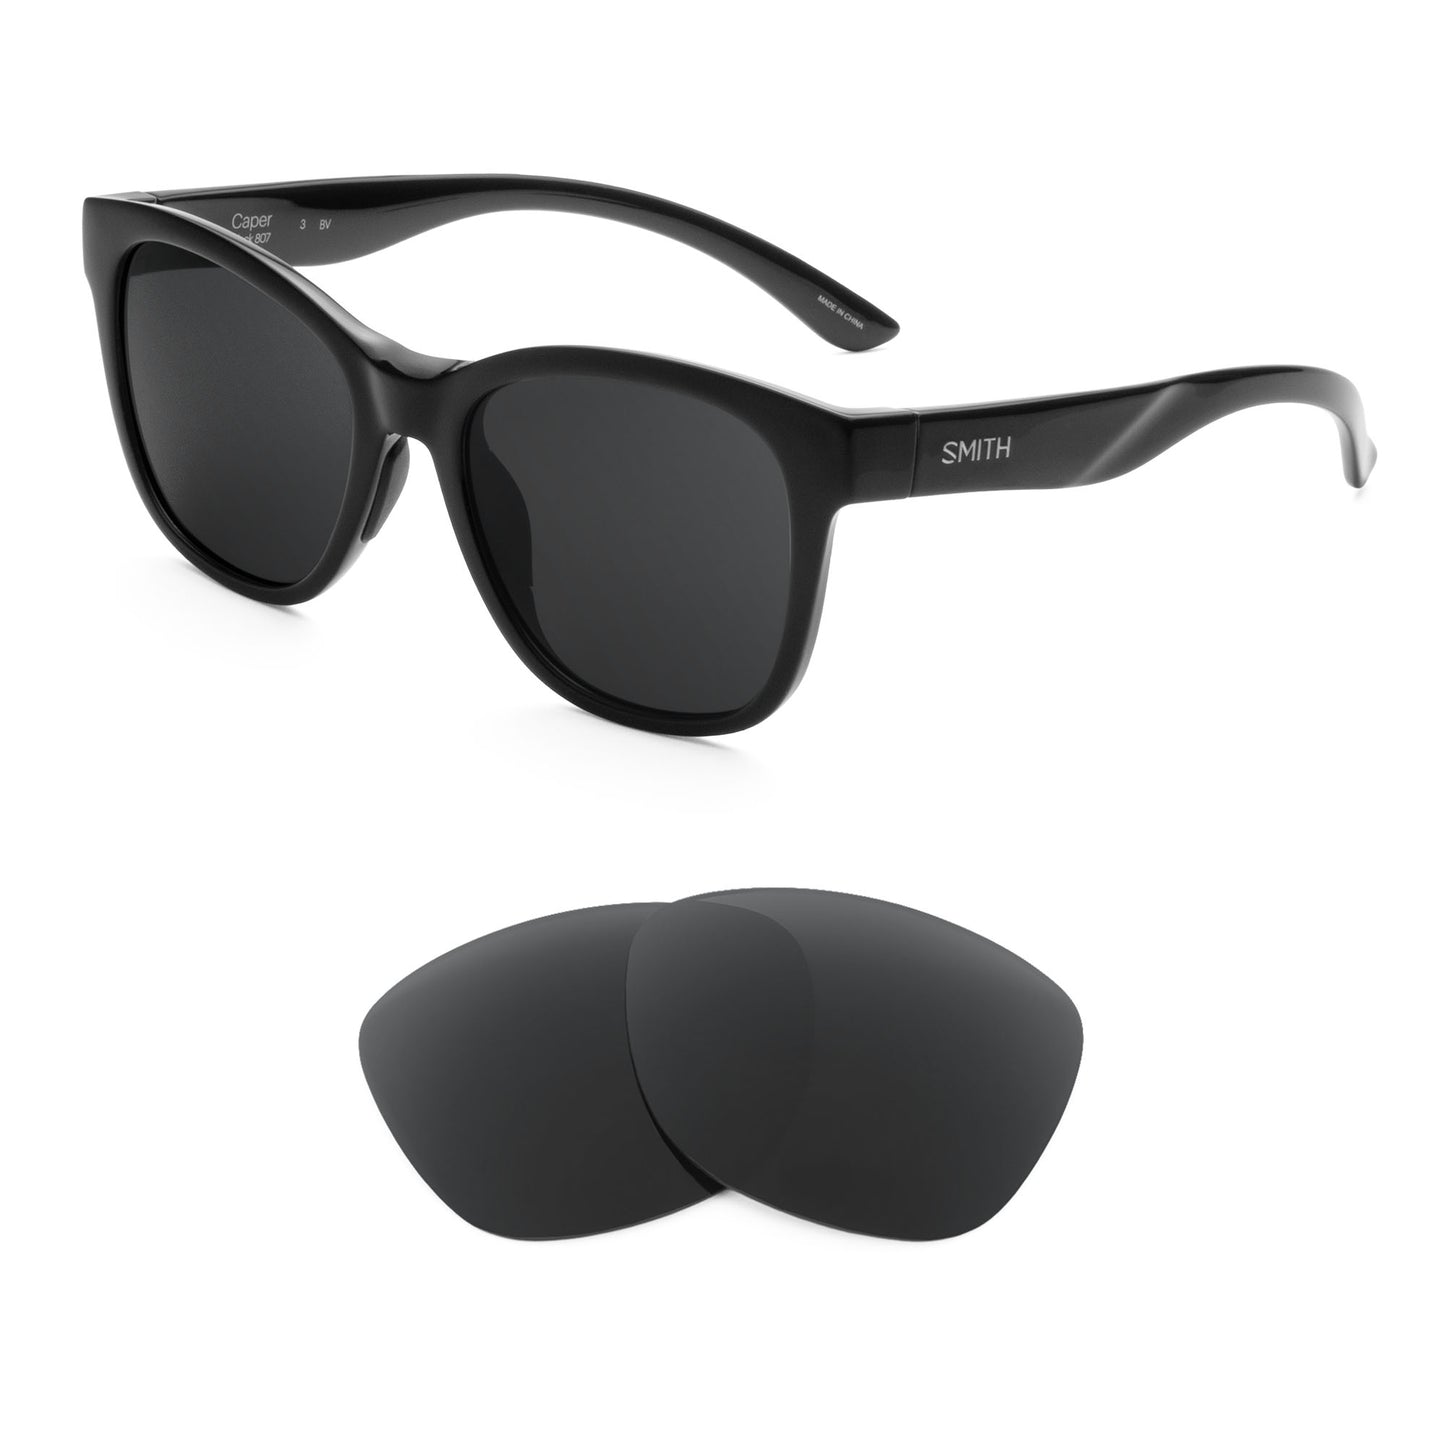 Smith Caper sunglasses with replacement lenses